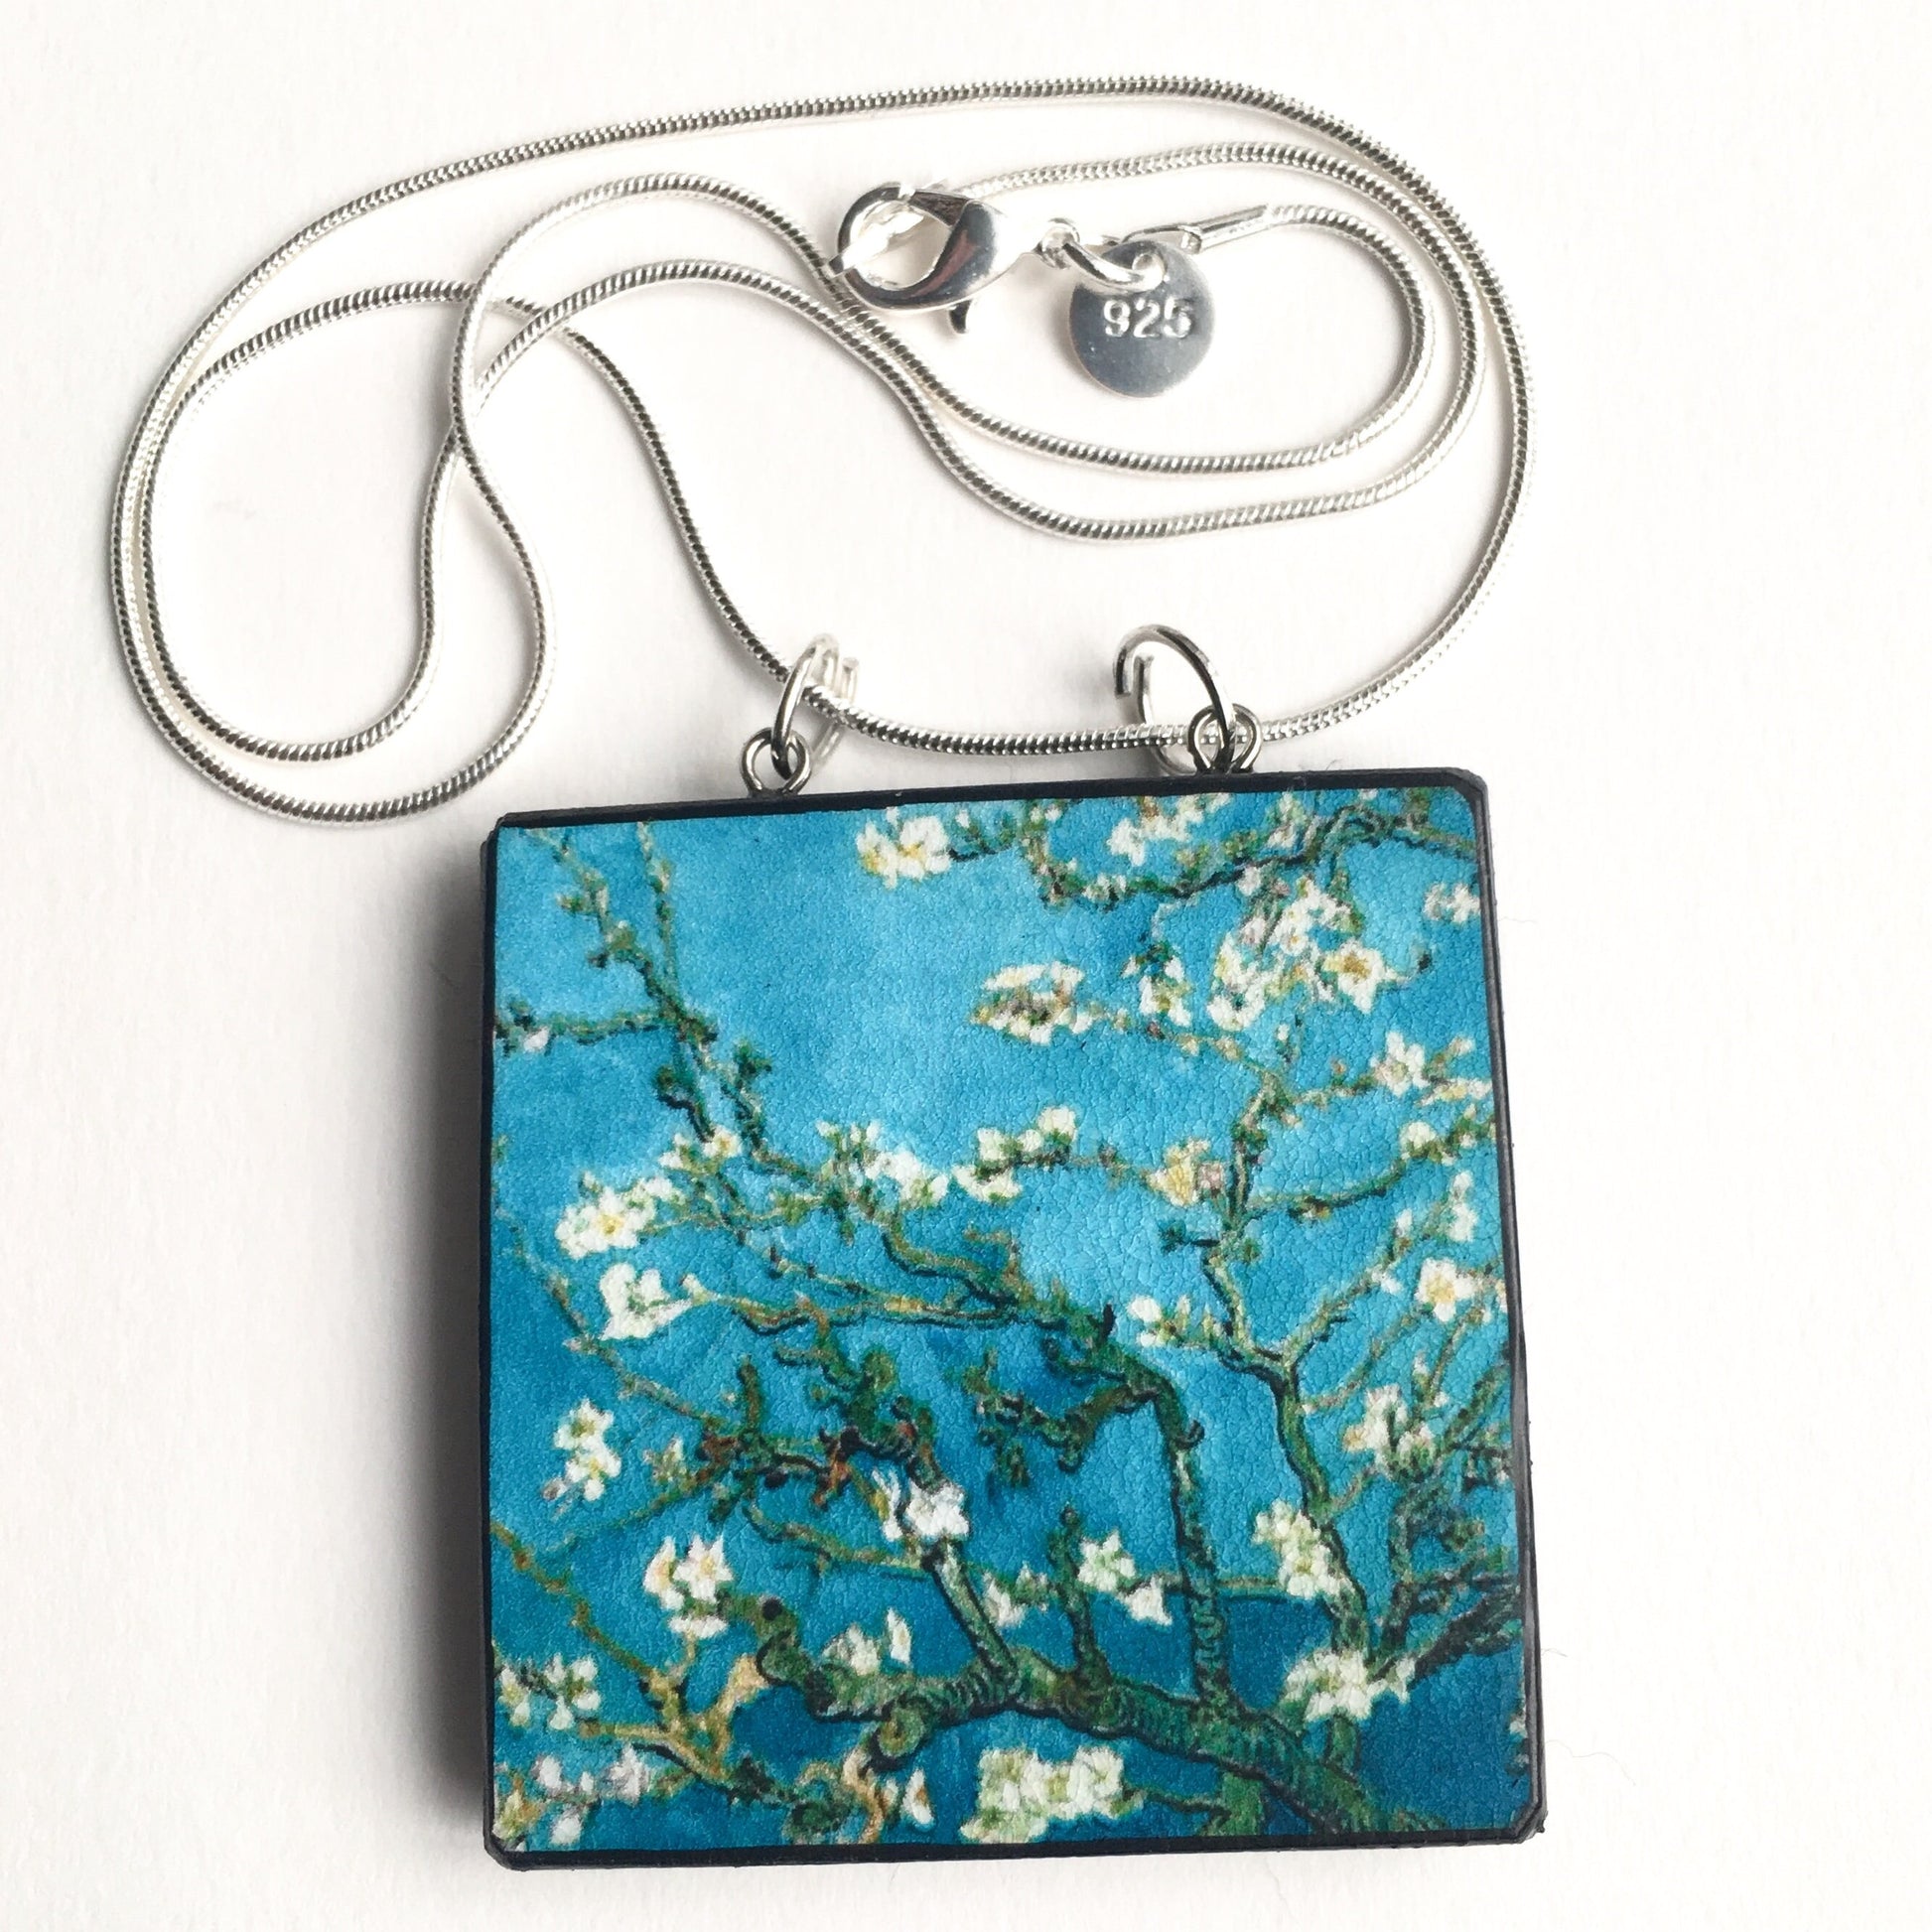  The Van Gogh necklaces is inspired by the masterpiece "Almond Blossom" where the artist painted one of his favourite subjects  large flowering branches against a blue sky. The almond tree blooms is a symbol of new life, this painting was a gift for his brother Theo and his wife who had a son.  Vincent Van Gogh was inspired by Japanese prints.   Vincent van Gogh (1853 - 1890), Saint-Rémy-de-Provence, February 1890 oil on canvas, 73.3 cm x 92.4 cm